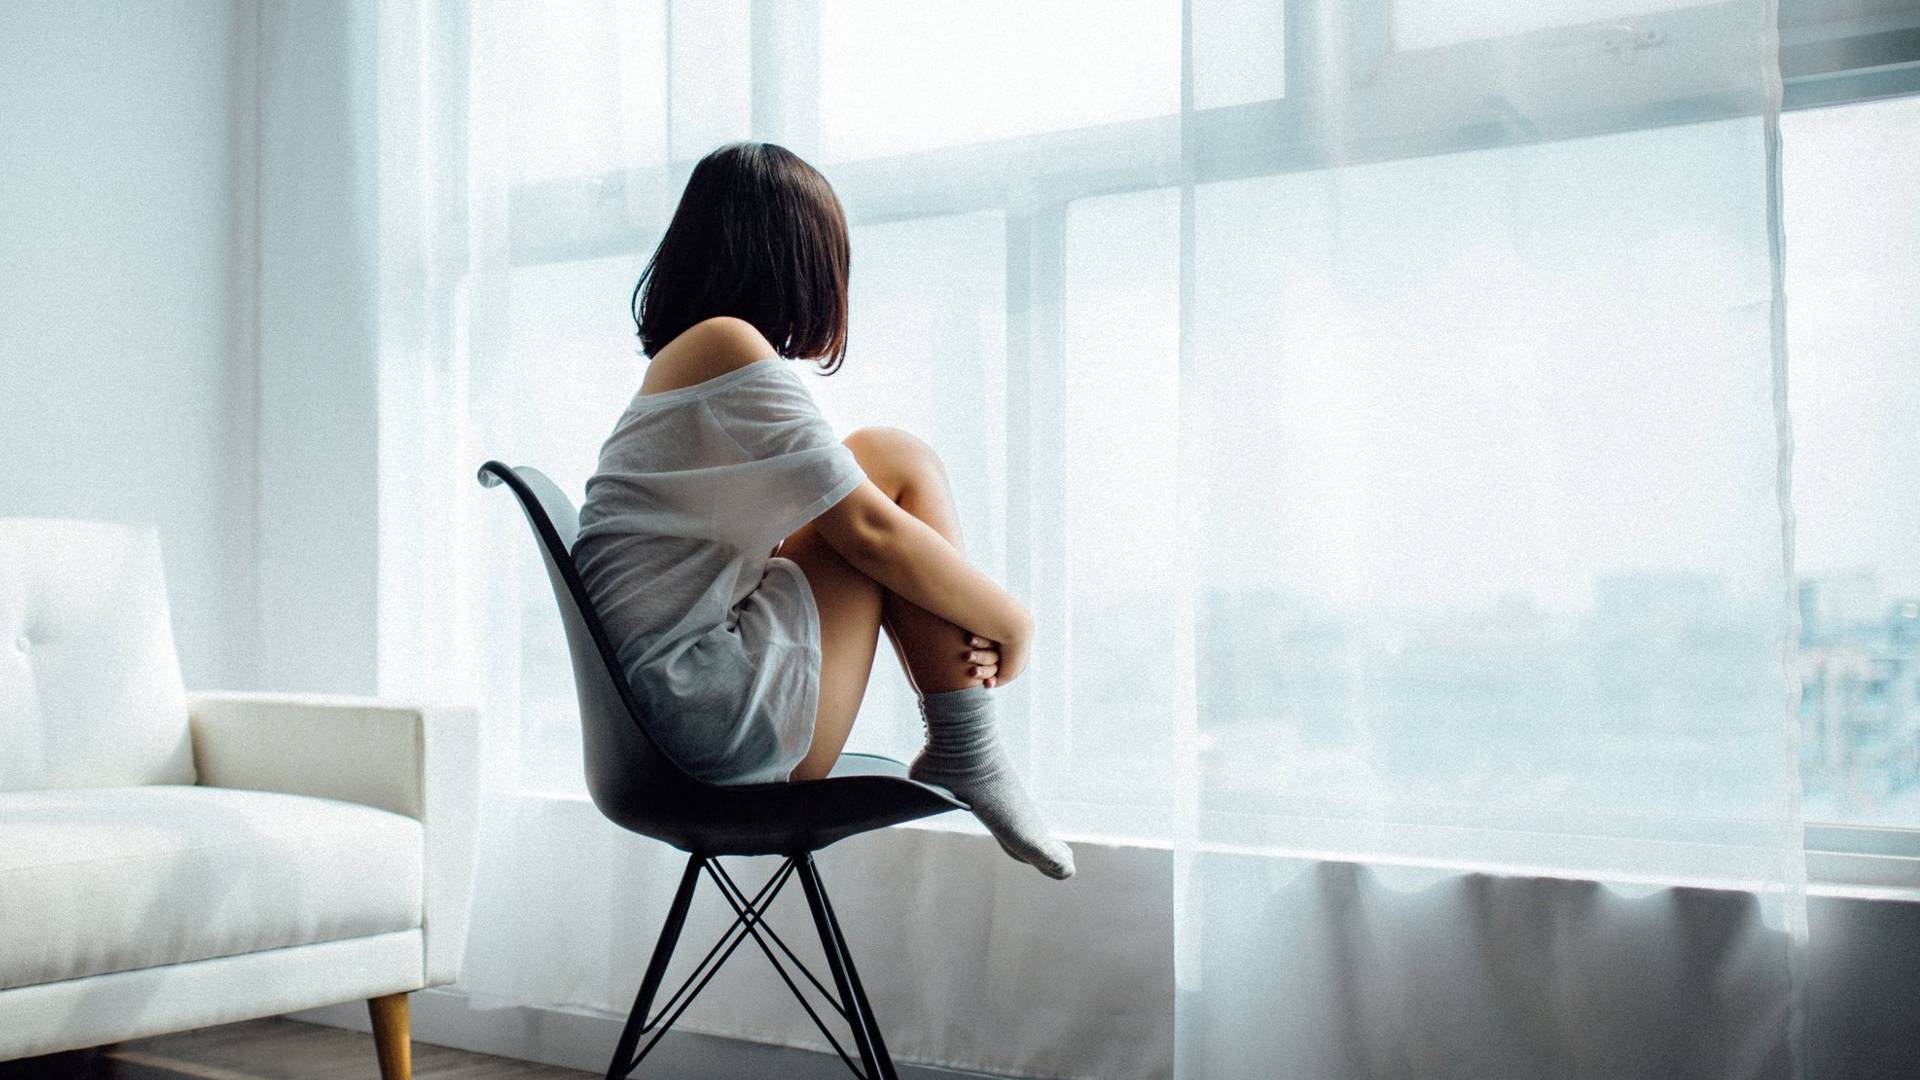 Girl sitting in front of the window and hugging her legs